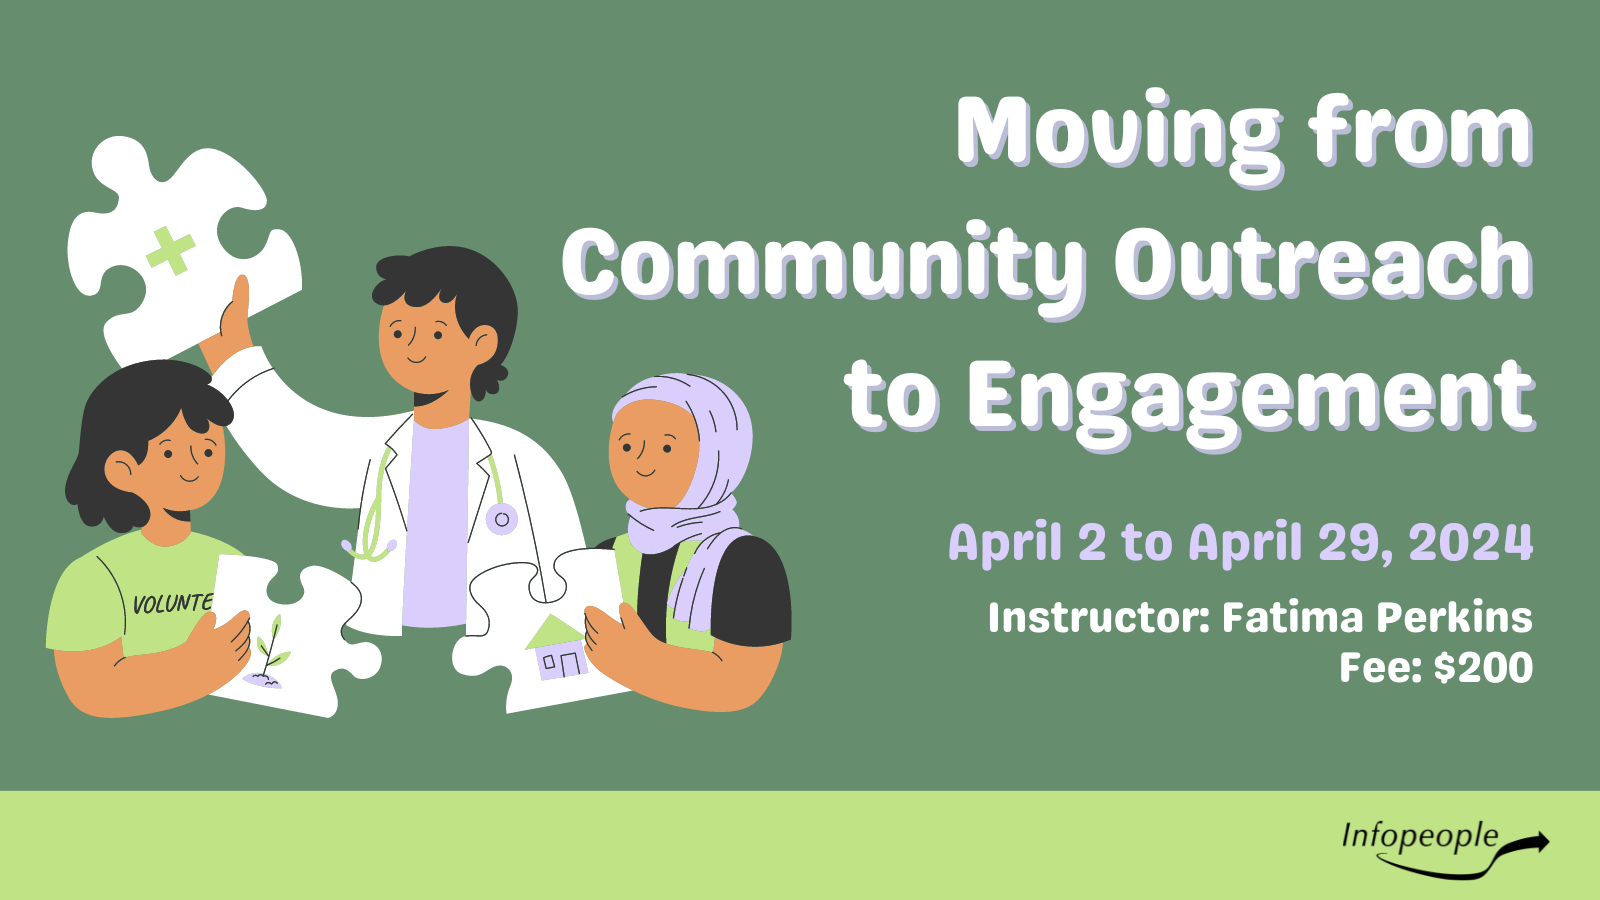 Moving from Community Outreach to Engagement - an Infopeople course. April 2 to April 29, 2024. Instructor: Fatima Perkins. Fee: $200. Three community members holding puzzle pieces representing the environment, medicine, housing.